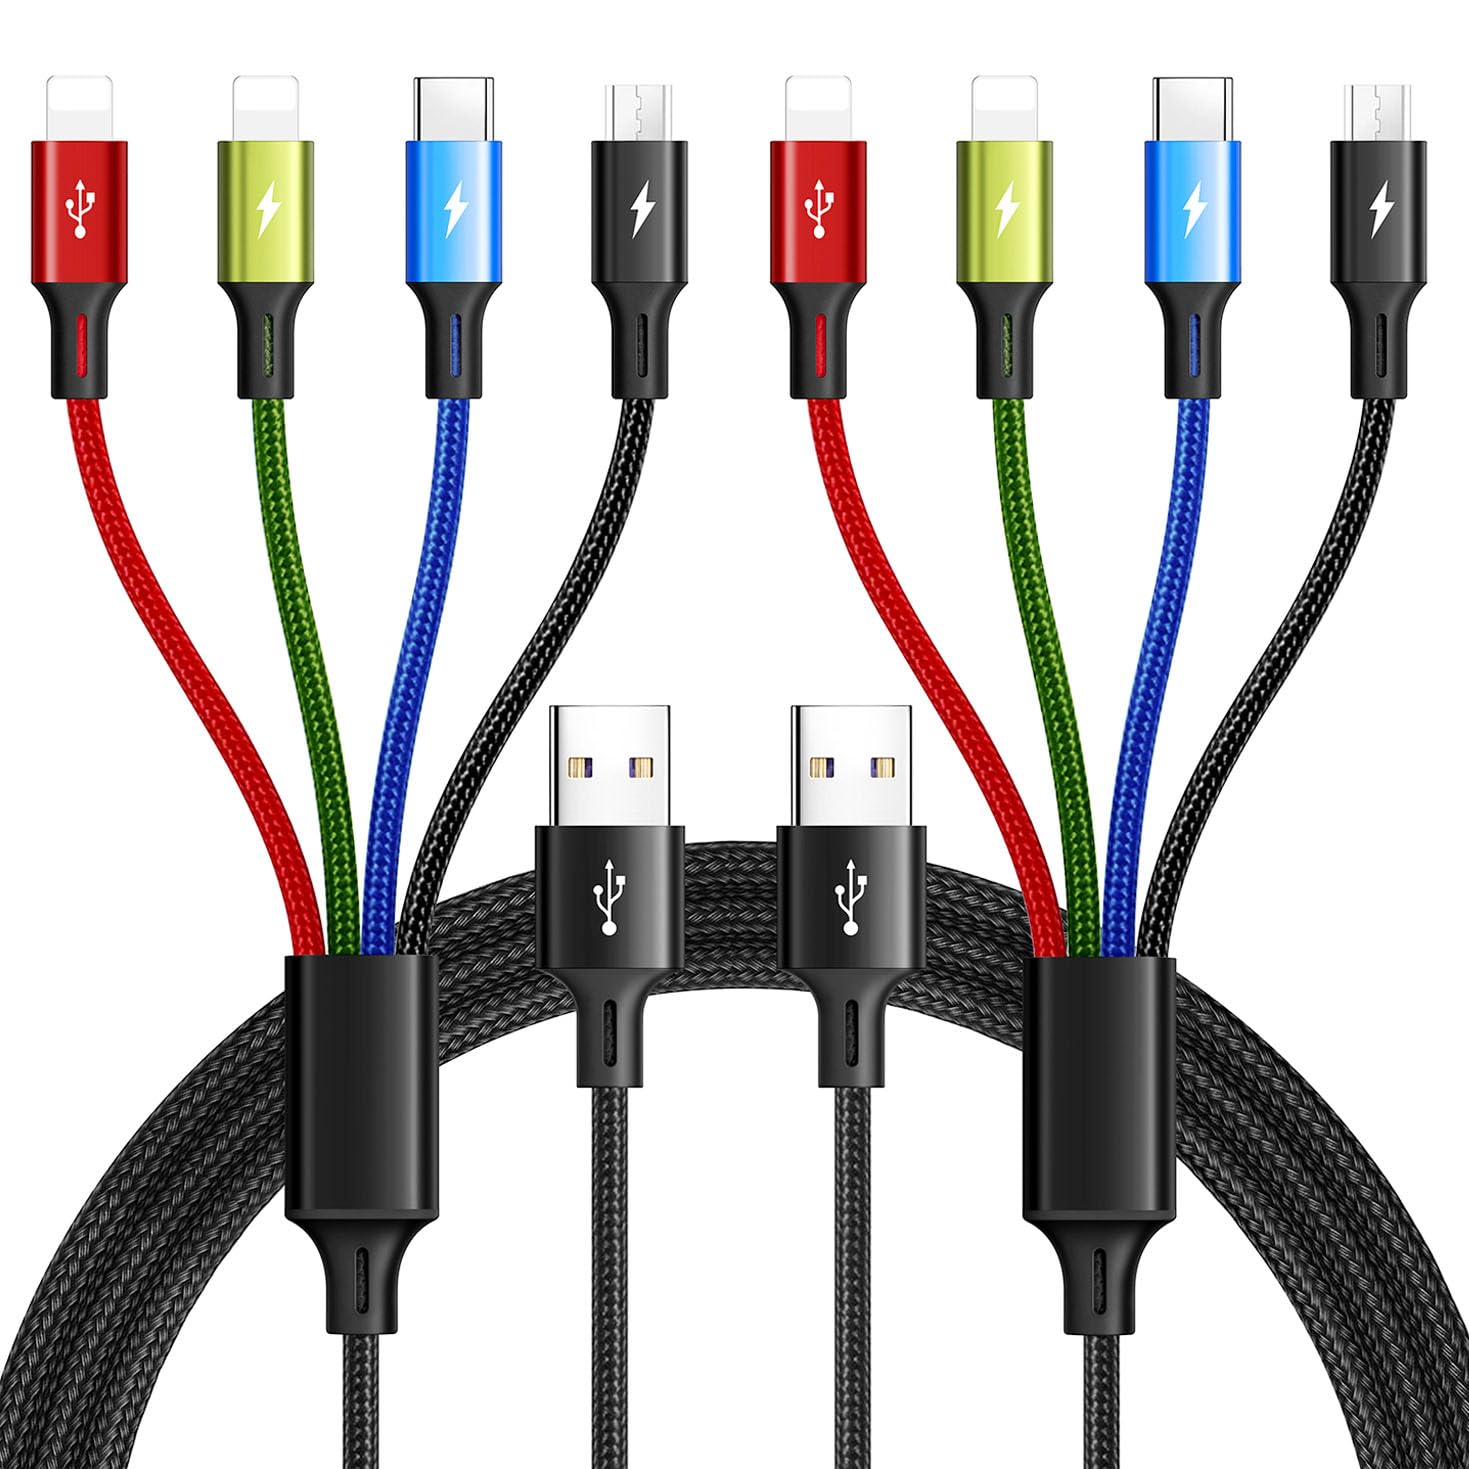 Multi Charging Cable,3.5A Multi Charger Cable,Braided 4 in 1 Charging Cable,Multi USB Cable, Fast Charging Cord with IP/